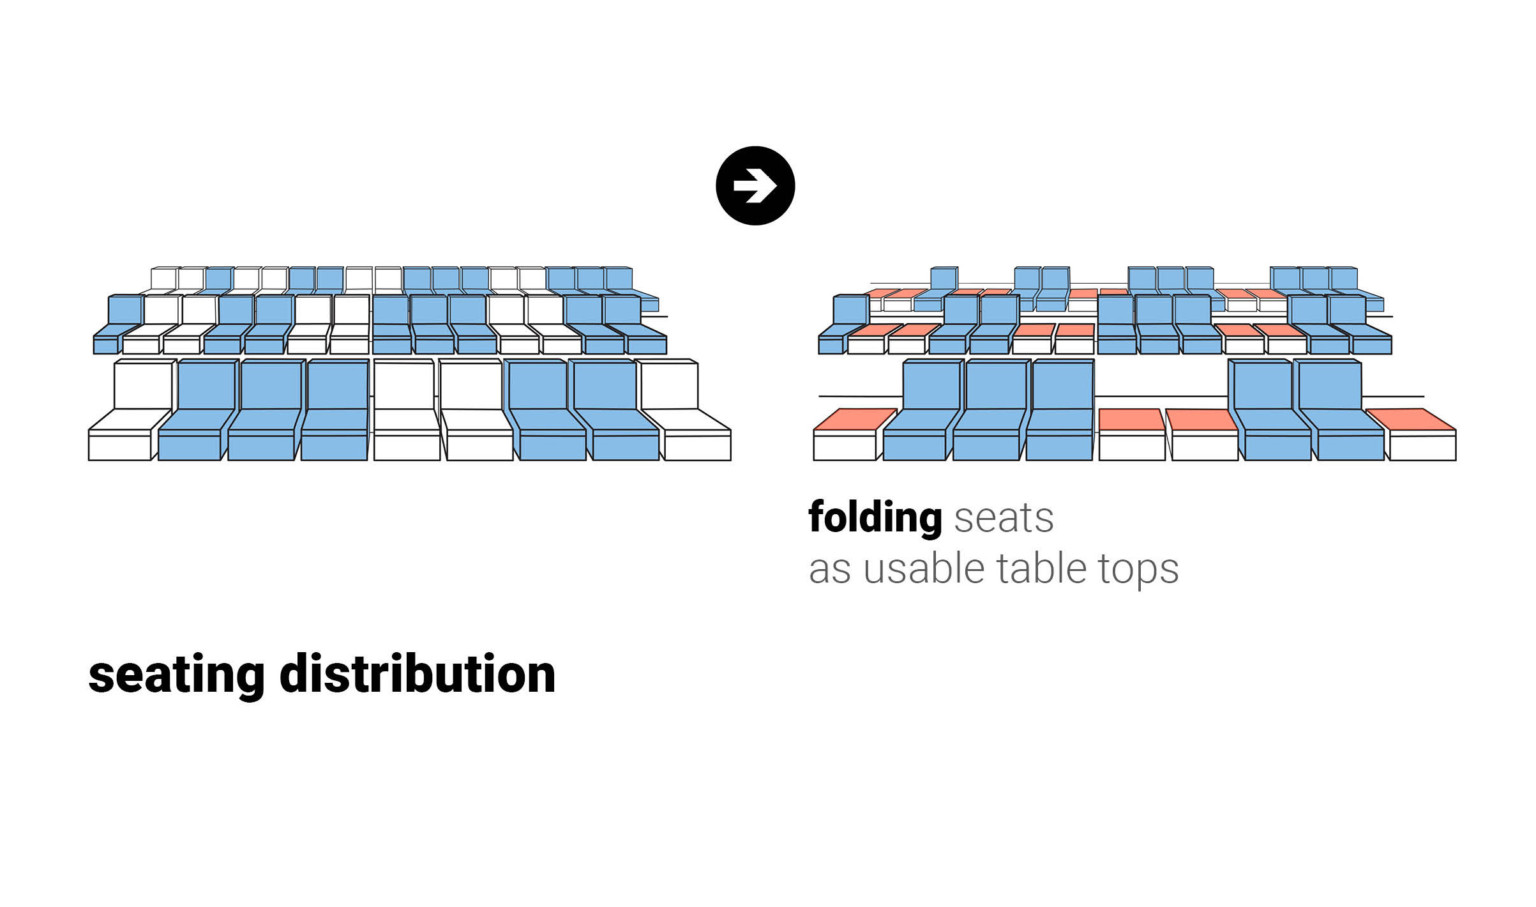 Diagram of seating distribution with some seats folded to create tables to allow social distancing